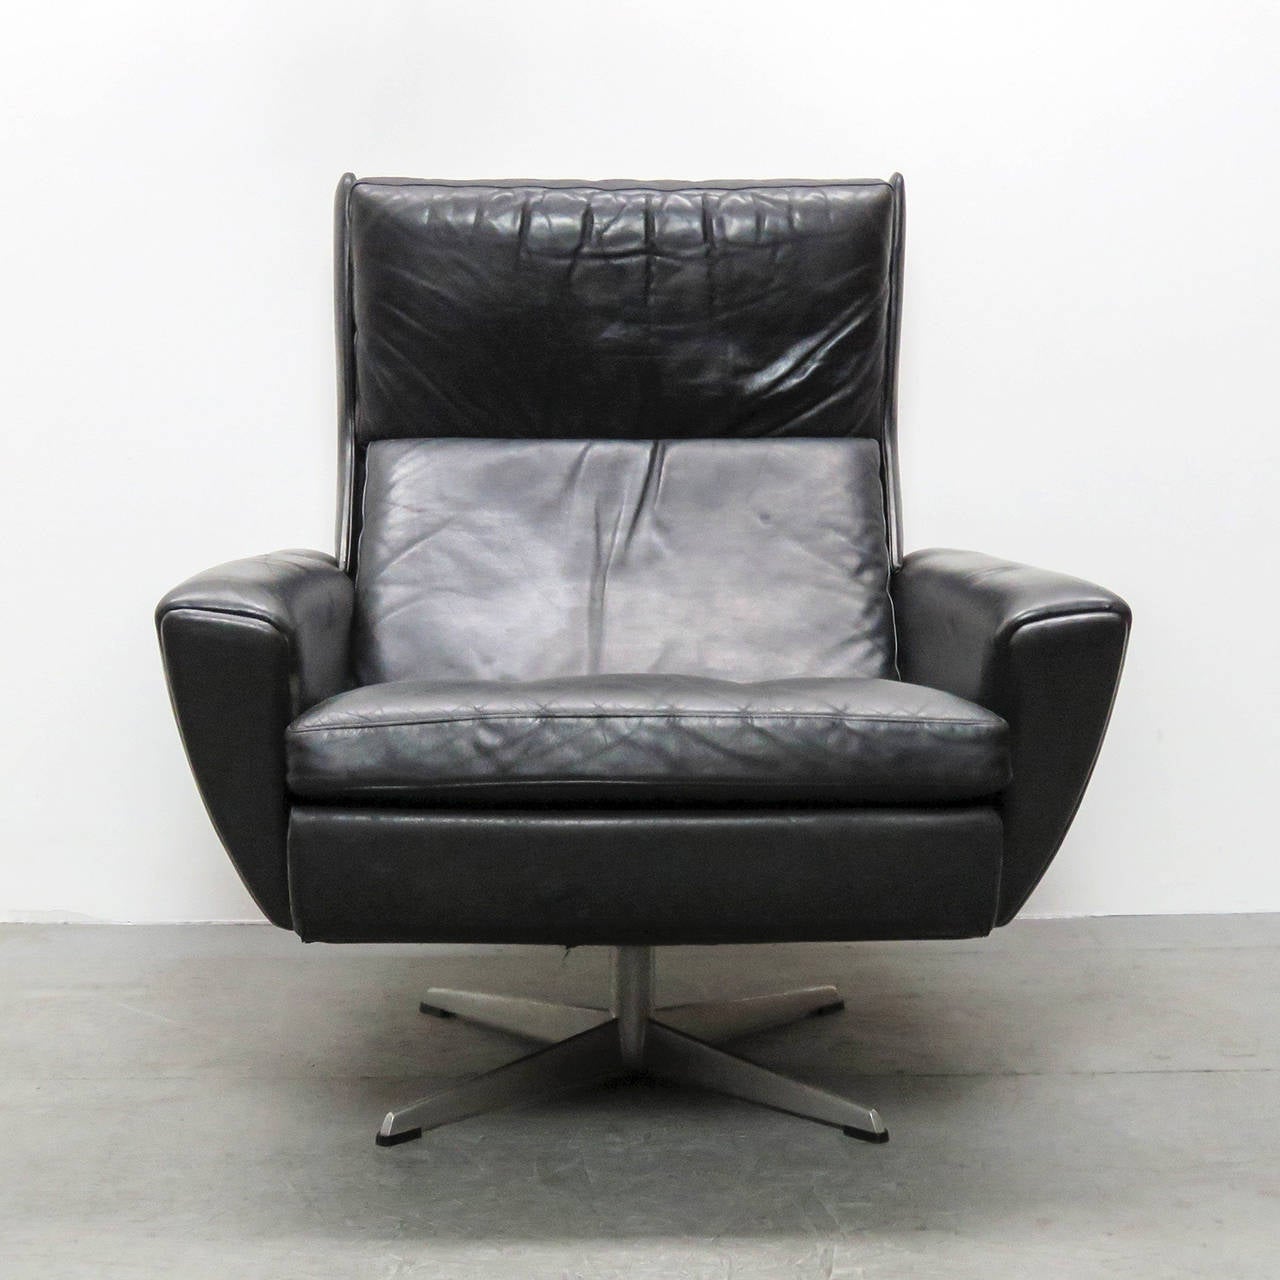 wonderful Georg Thams wing back lounge chair with ottoman in black leather and chrome plated aluminum